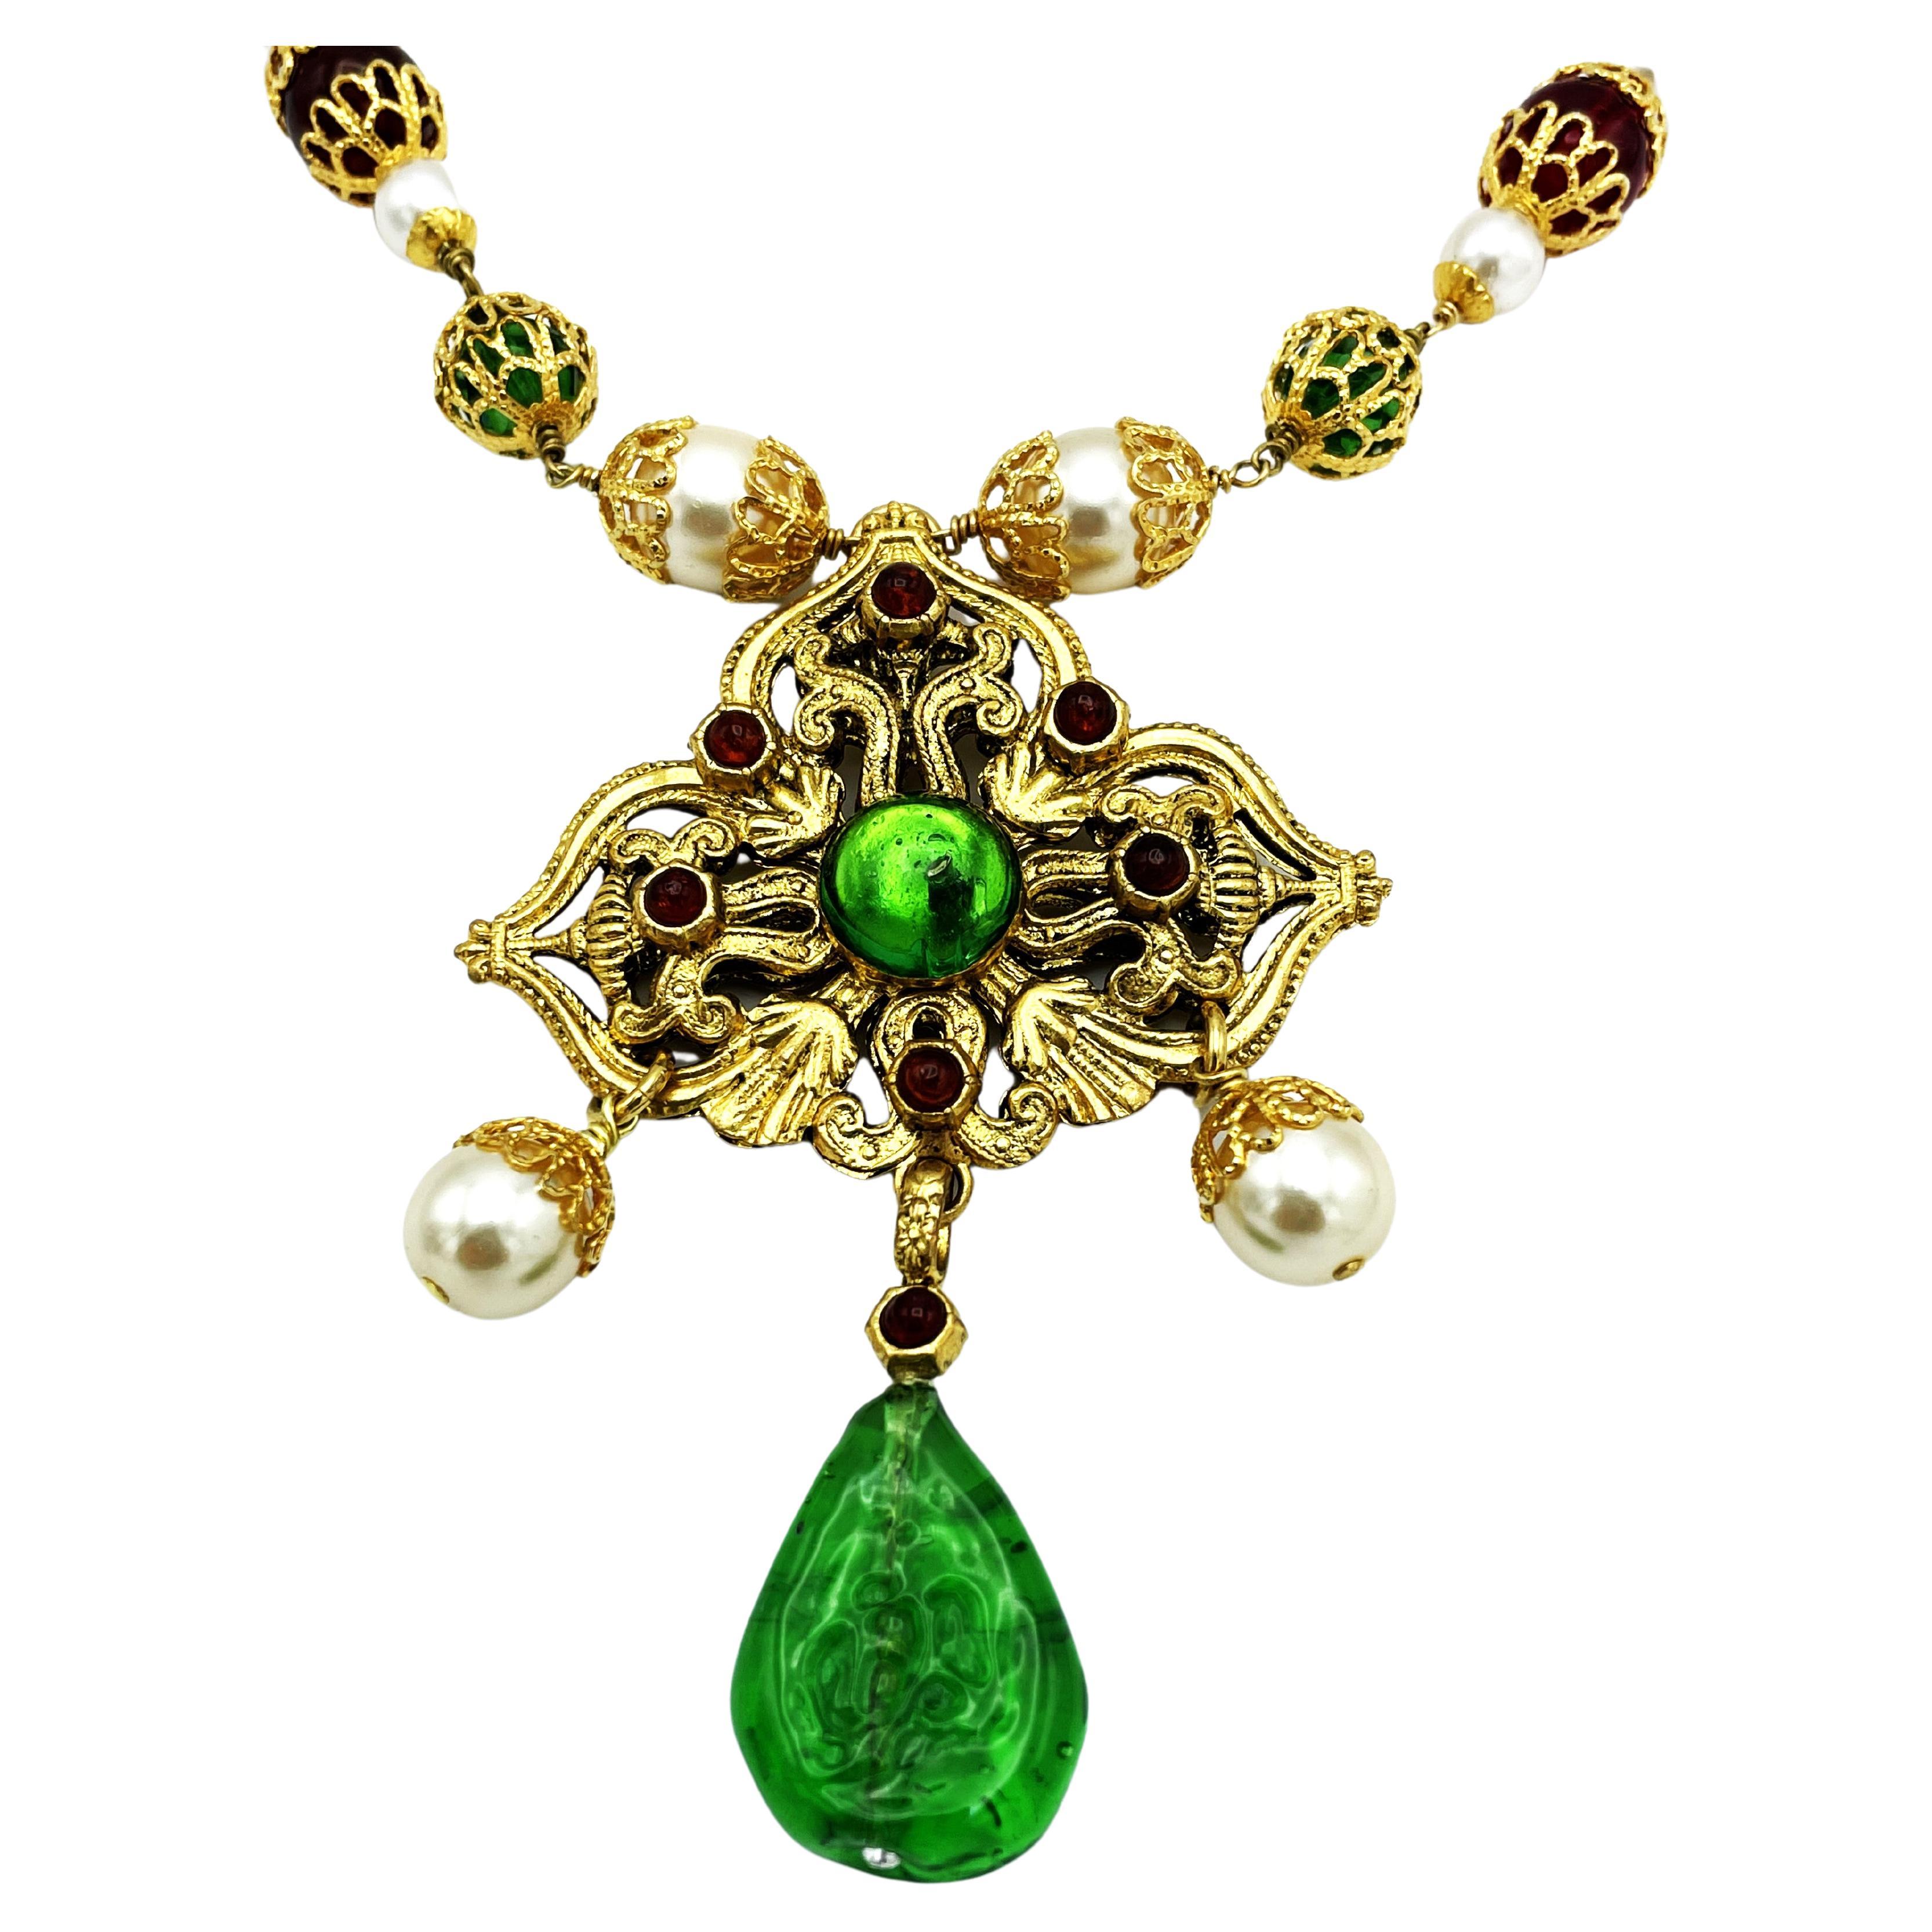 Today I can offer a unique Chanel necklace with a beautiful pendant with Gripoix glass drops from 1983.
The chain was worked by Robert Goossens Paris. The hand bead and metal work was done by Robert Goossens. The red and green Gripoix balls as well